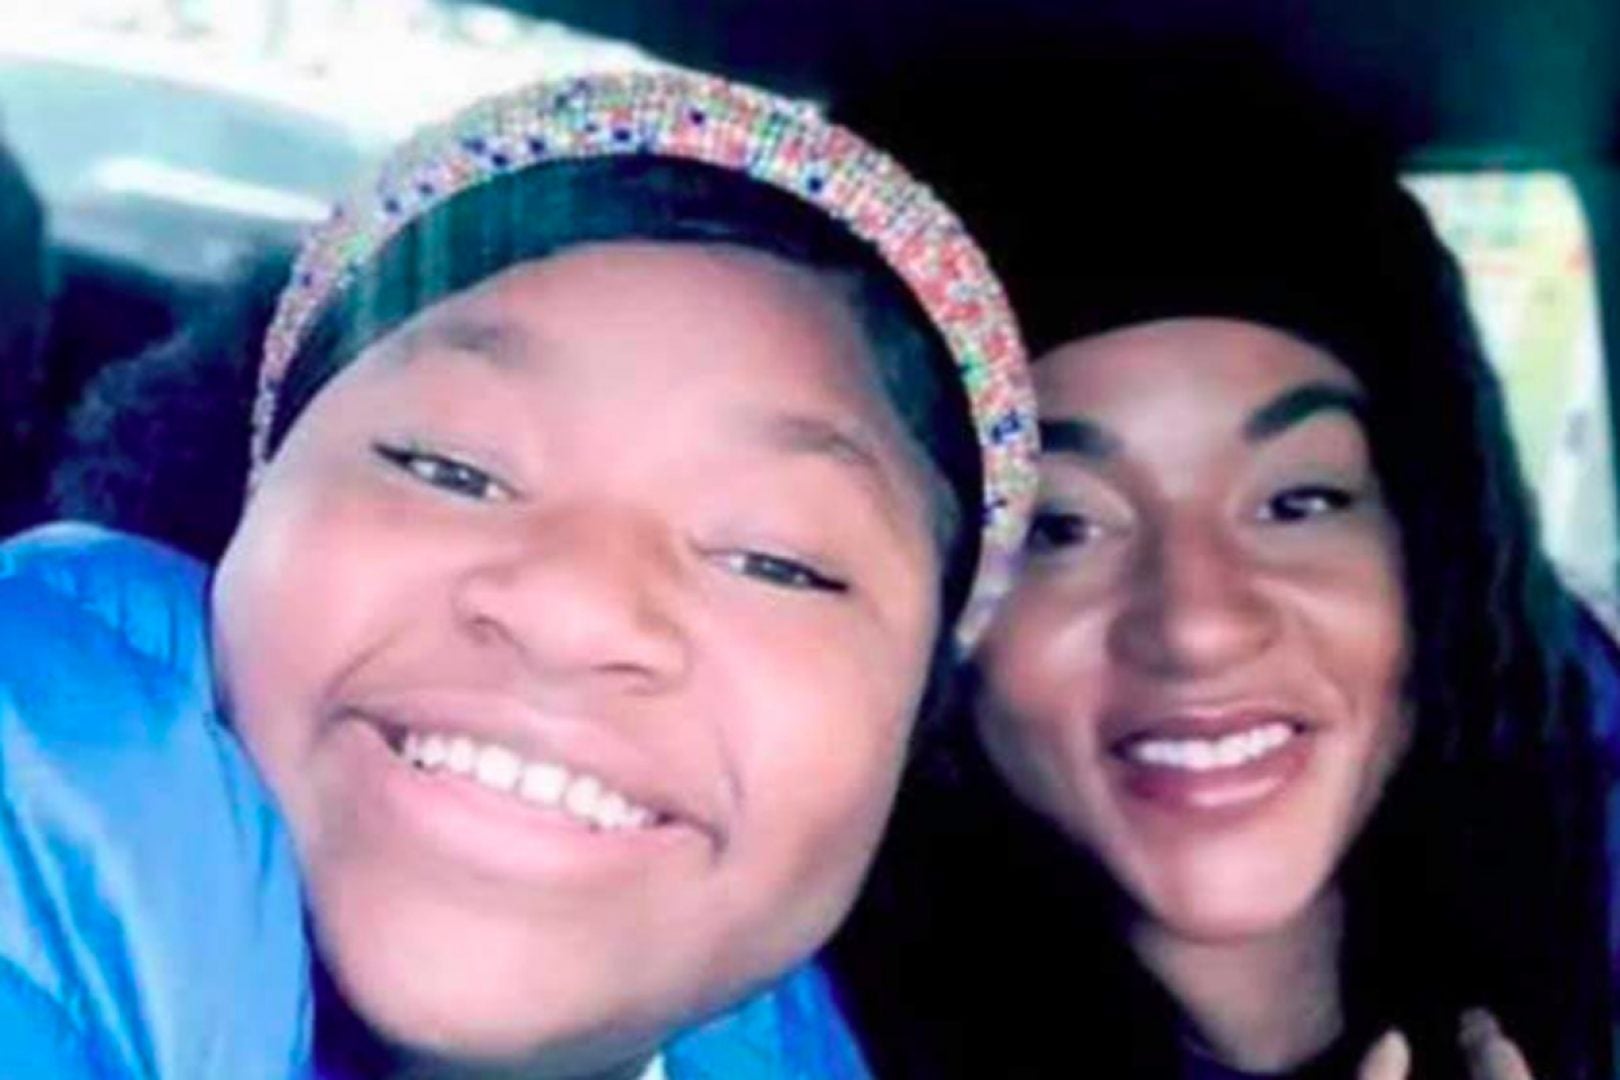 Ohio Cops Yell ‘Blue Lives Matter’ After Fatally Shooting 16-Year-Old Ma’Khia Bryant